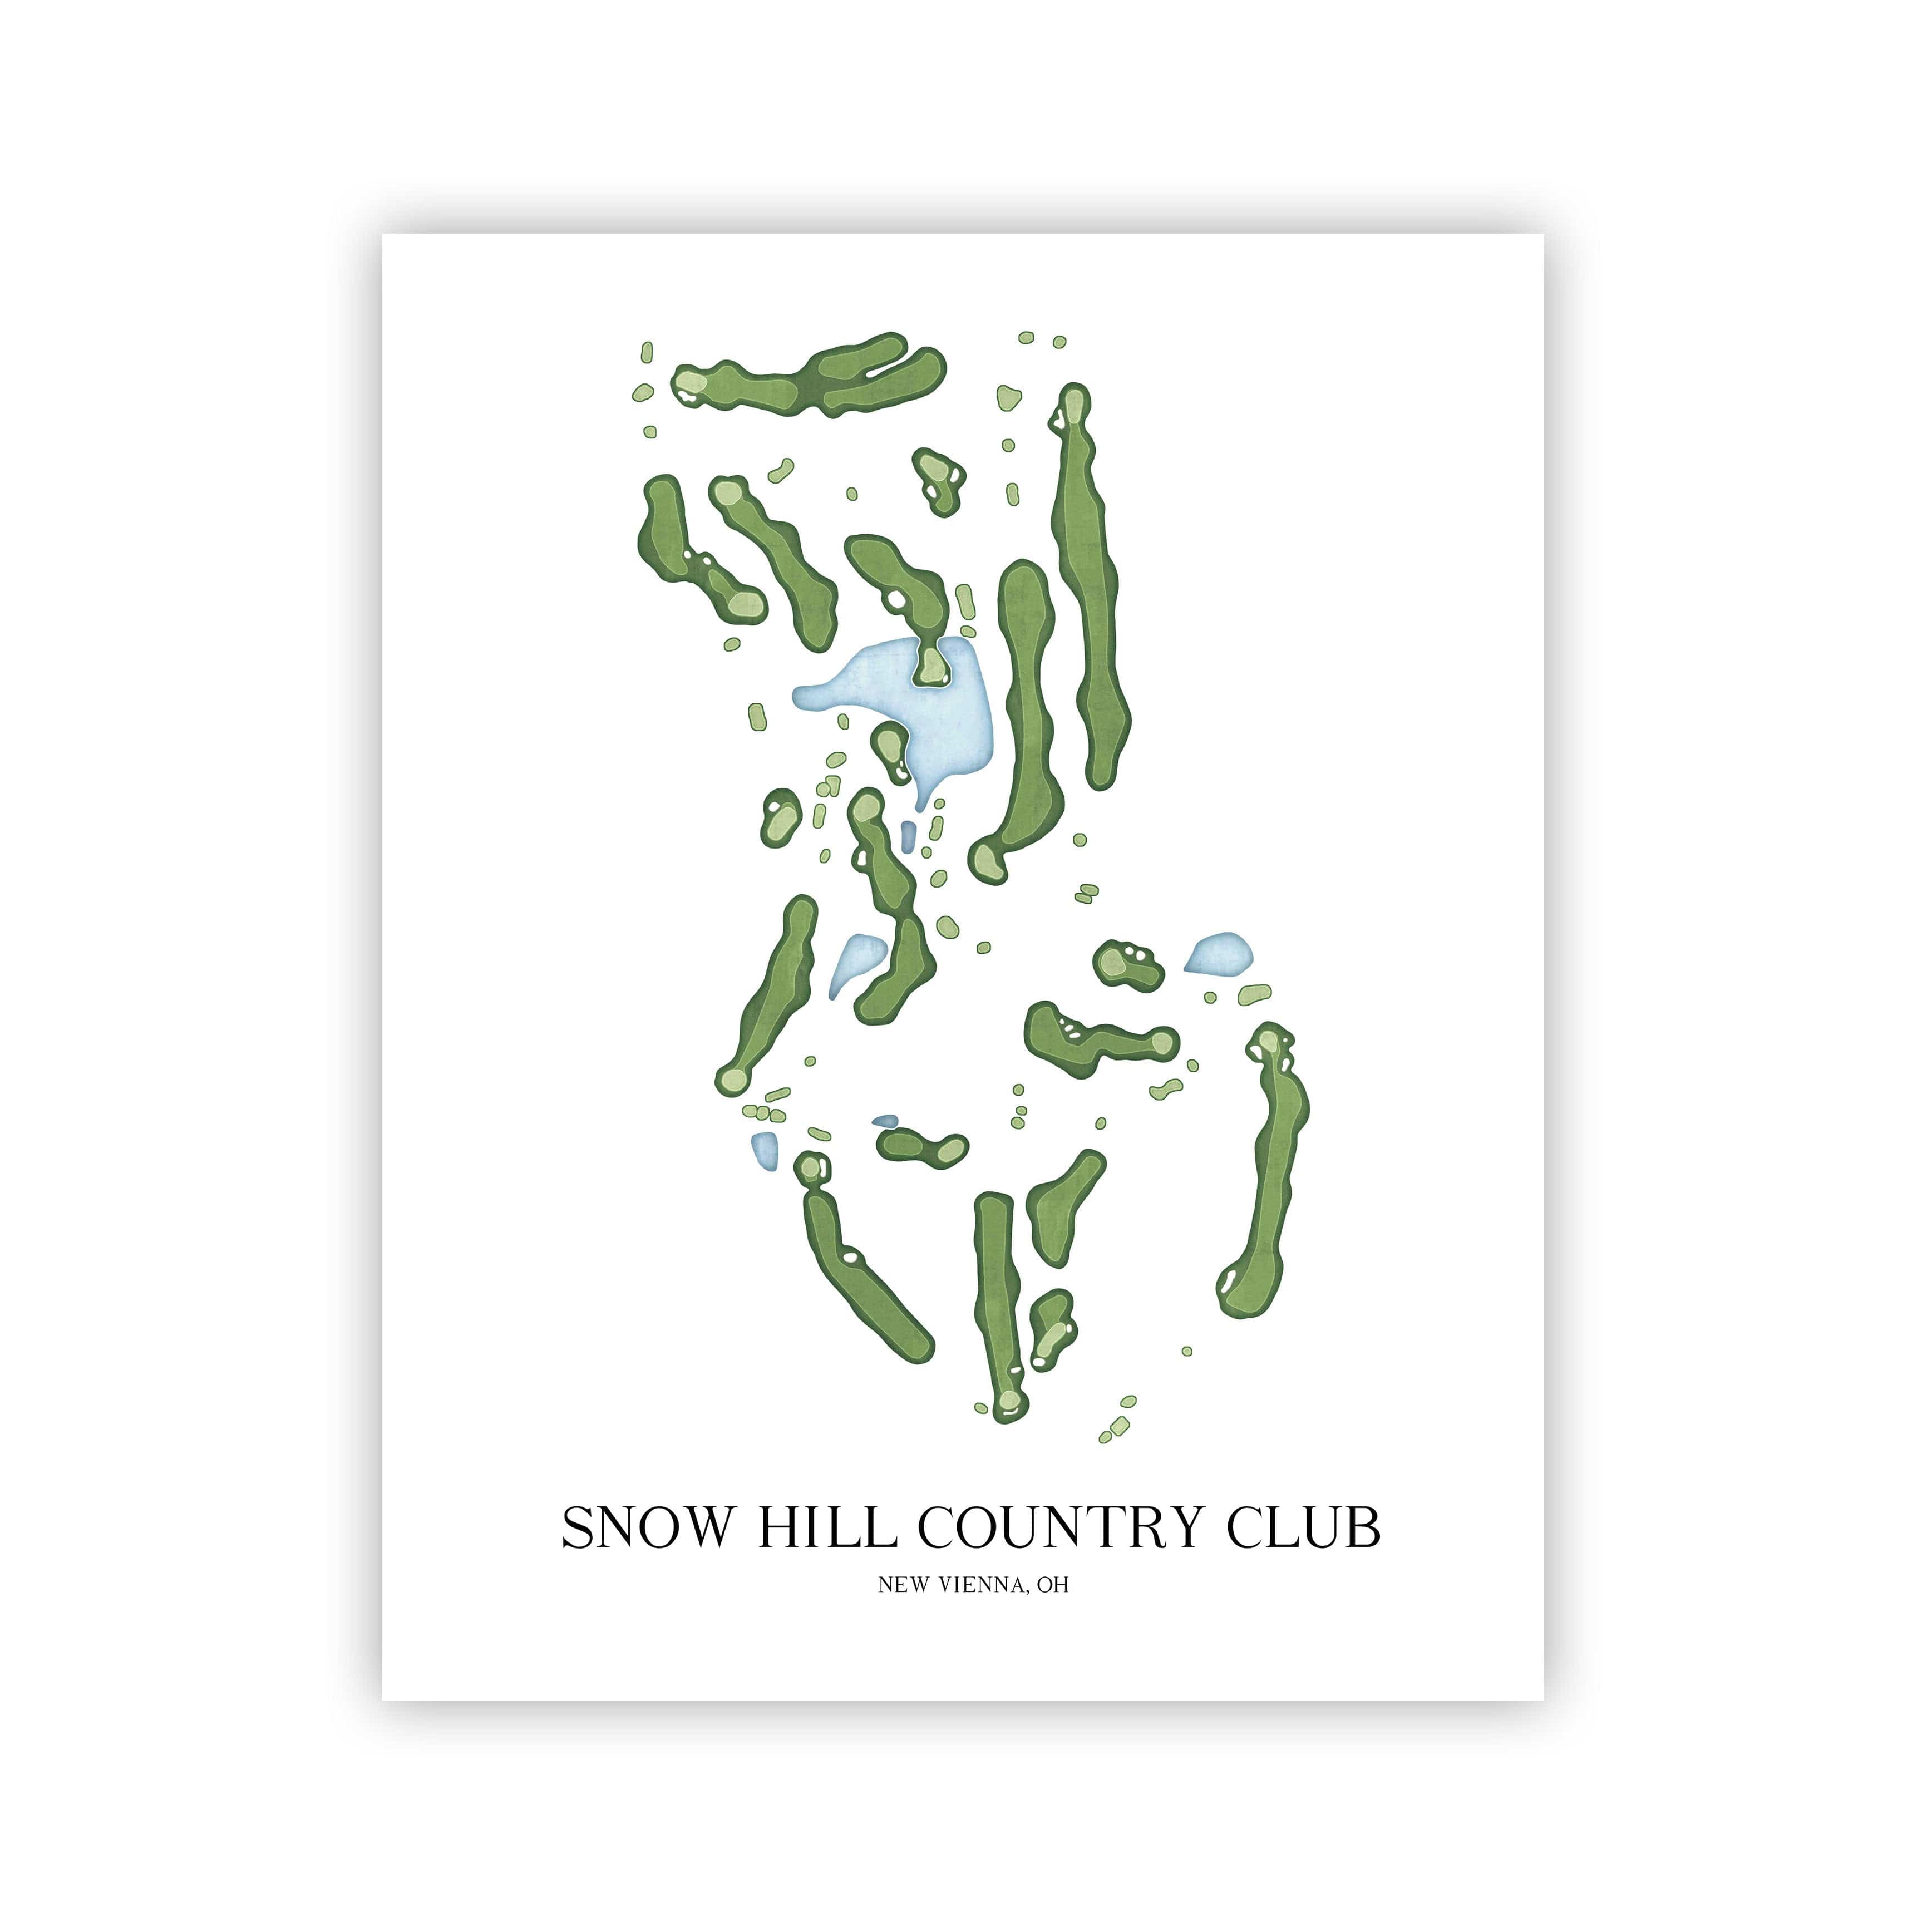 The 19th Hole Golf Shop - Golf Course Prints -  Snow Hill Country Club Golf Course Map